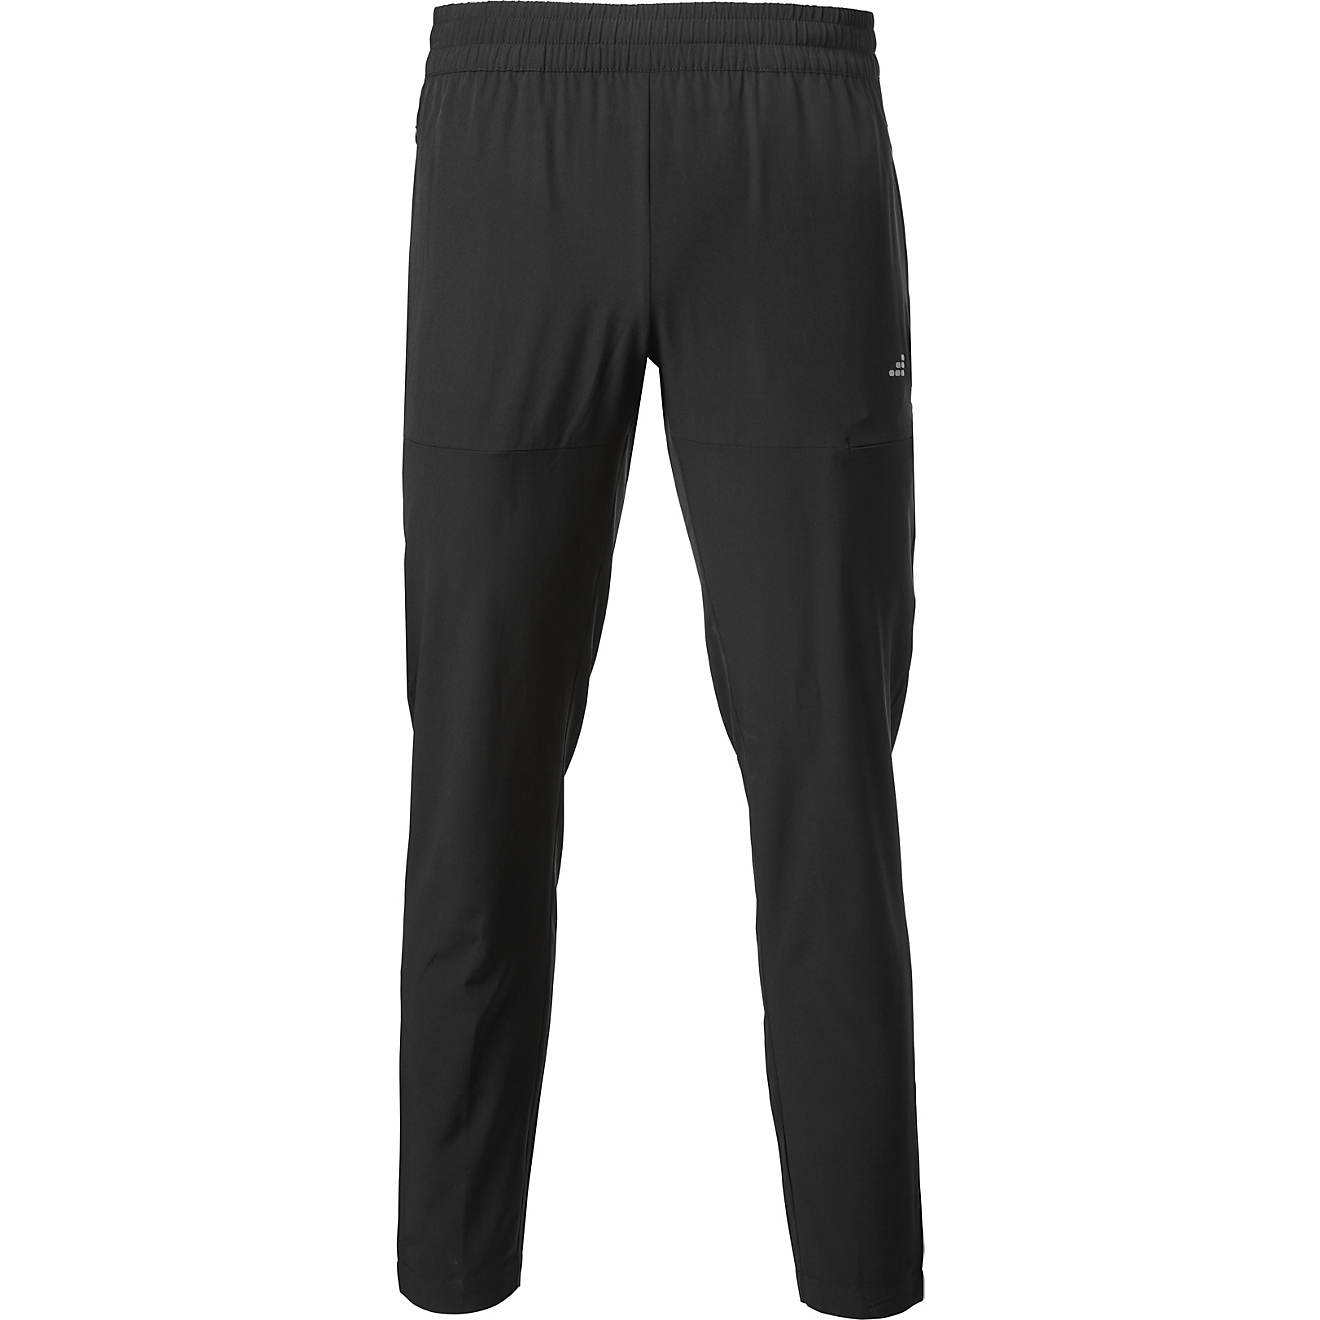 BCG Men's Stretch Tapered Training Pants